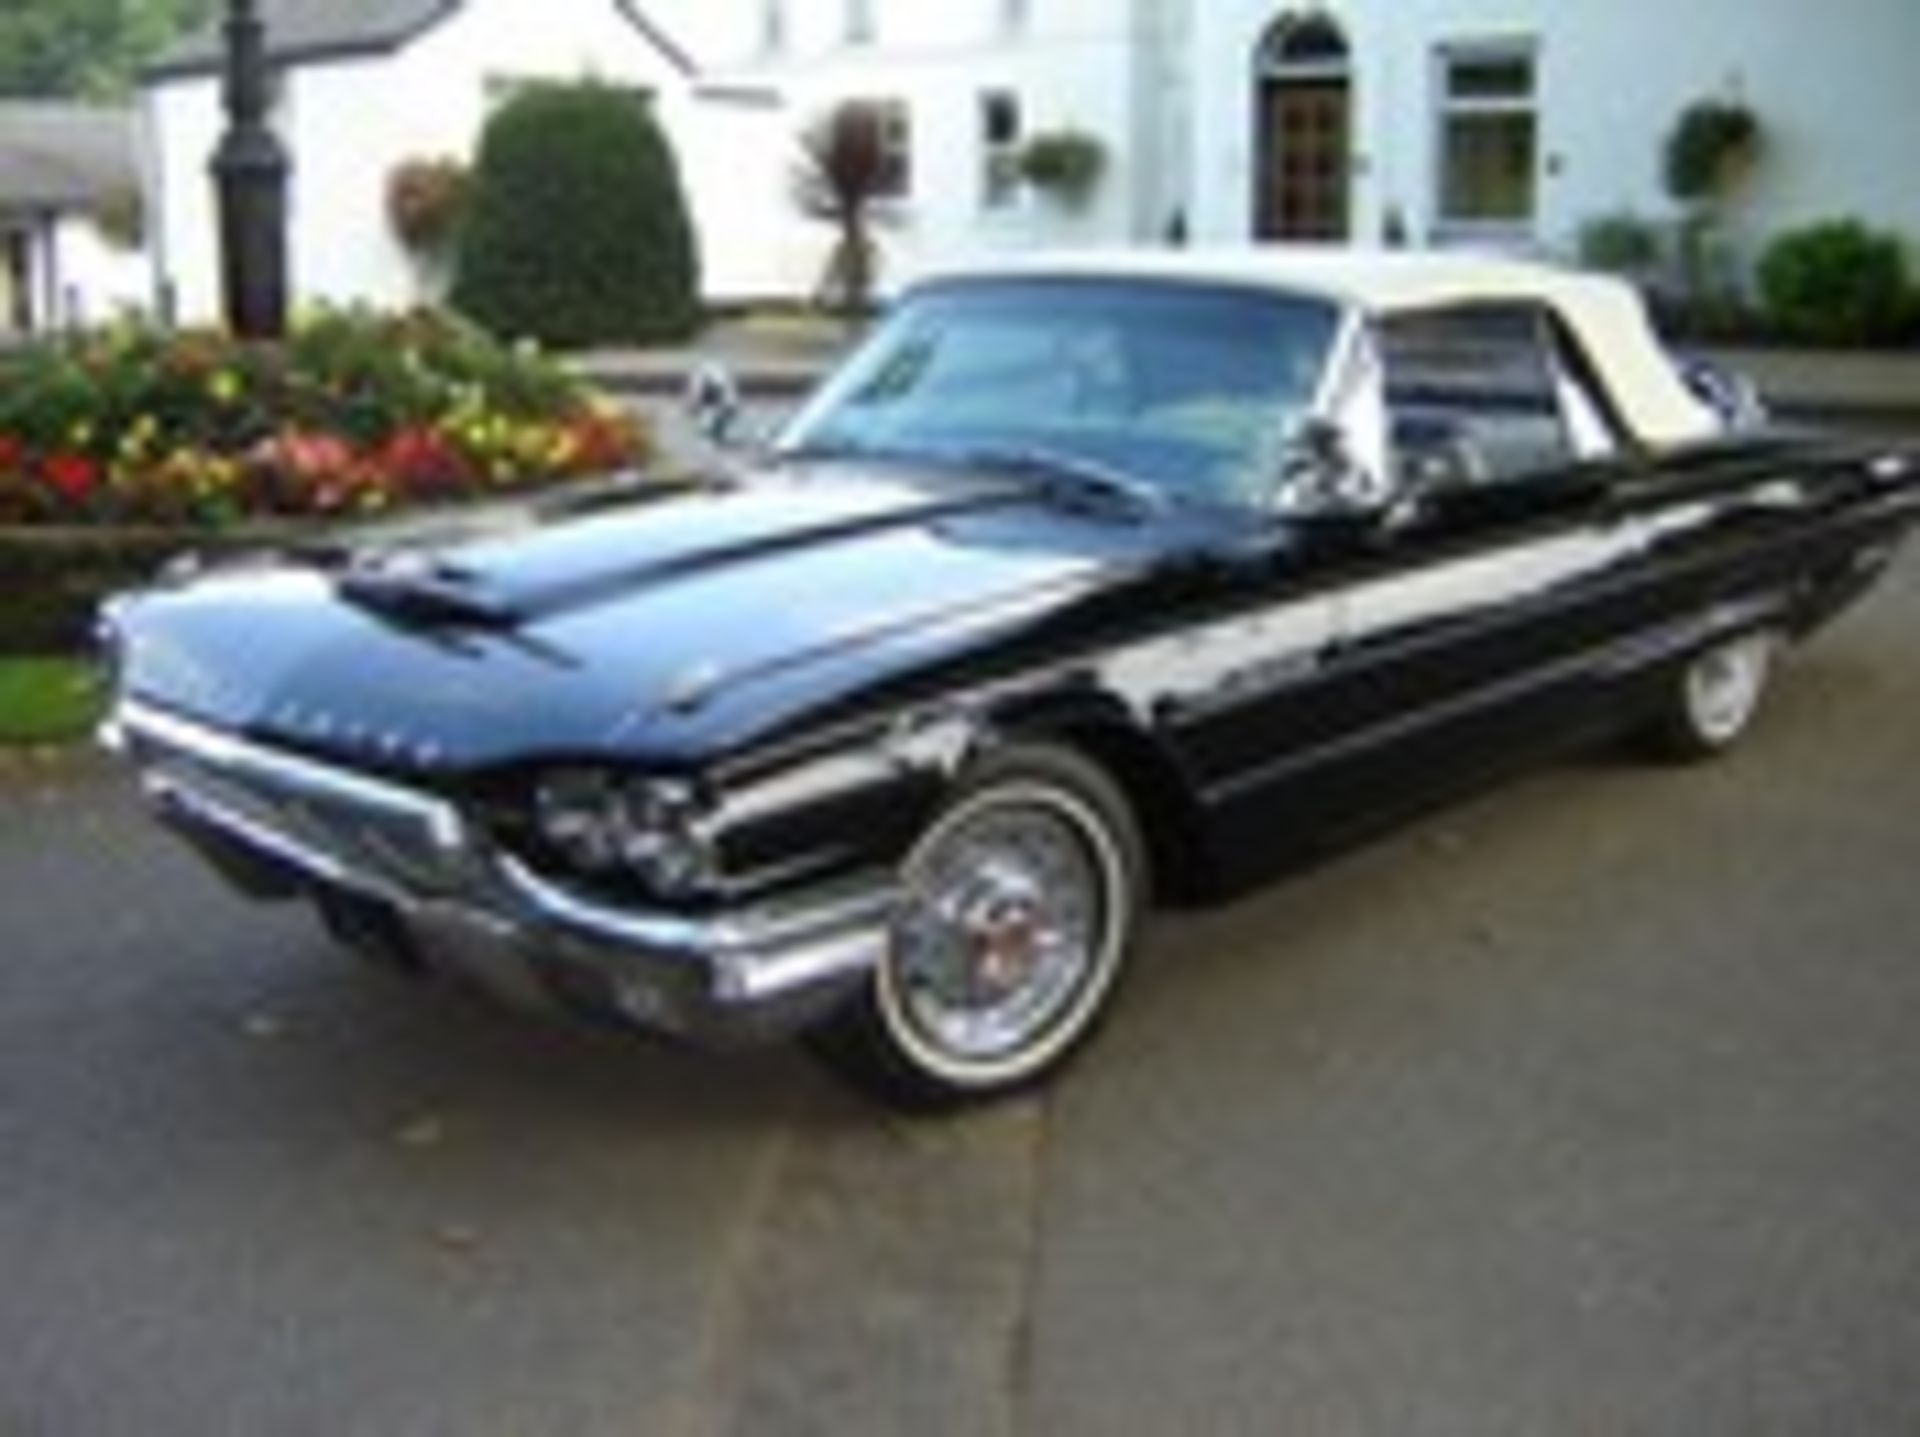 1964 'The Who' Ford Thunderbird Convertible - belonged to the late John Entwistle of The Who